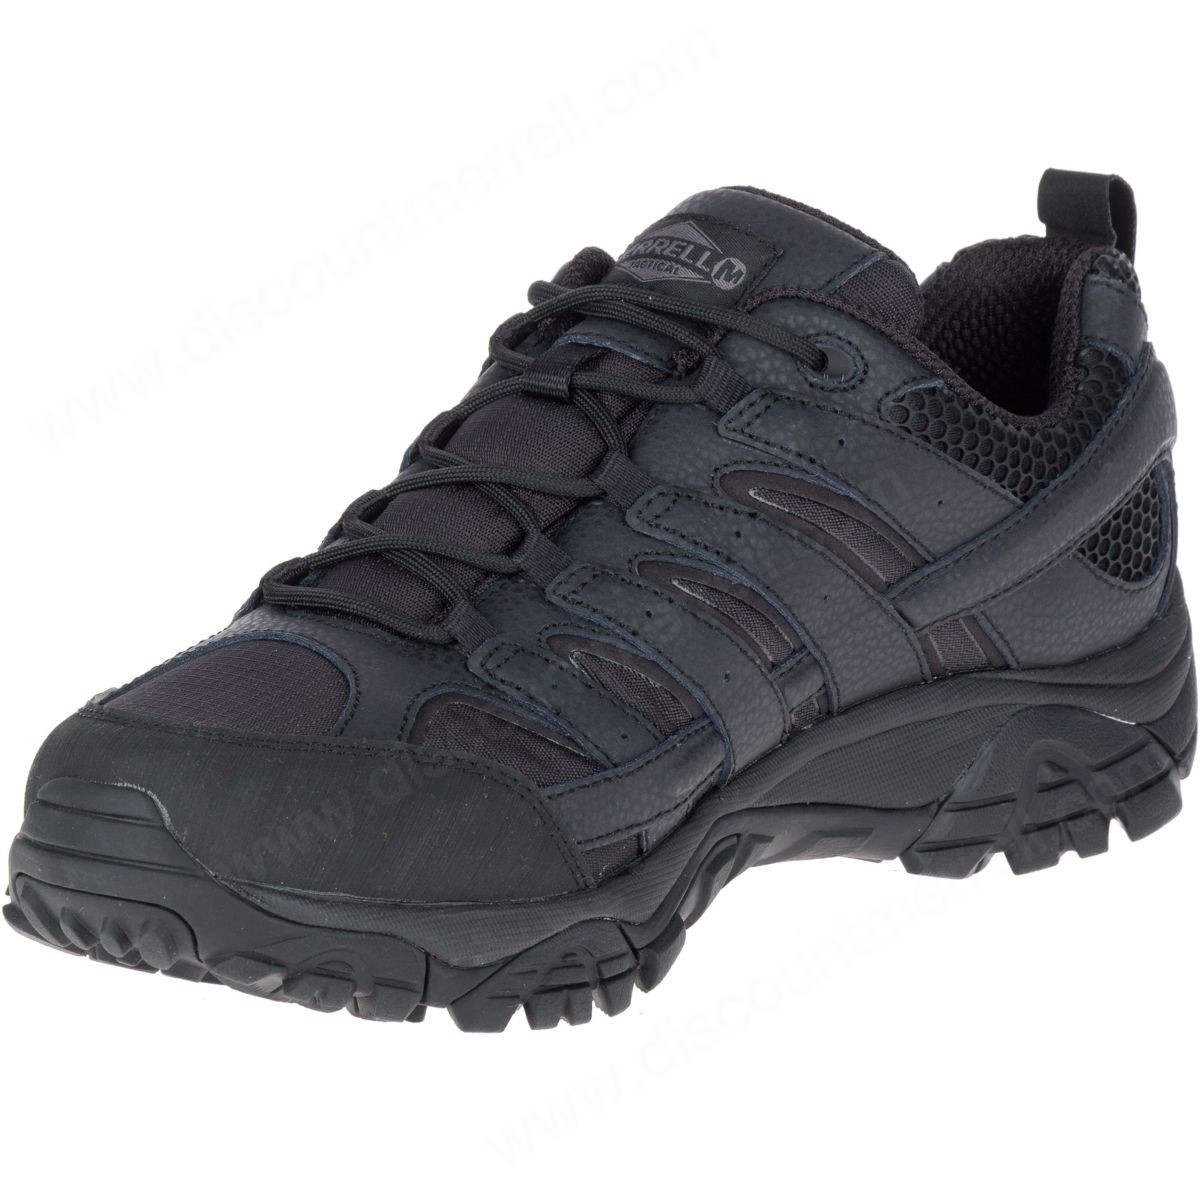 Merrell Man's Moab Tactical Shoes Wide Black - -5